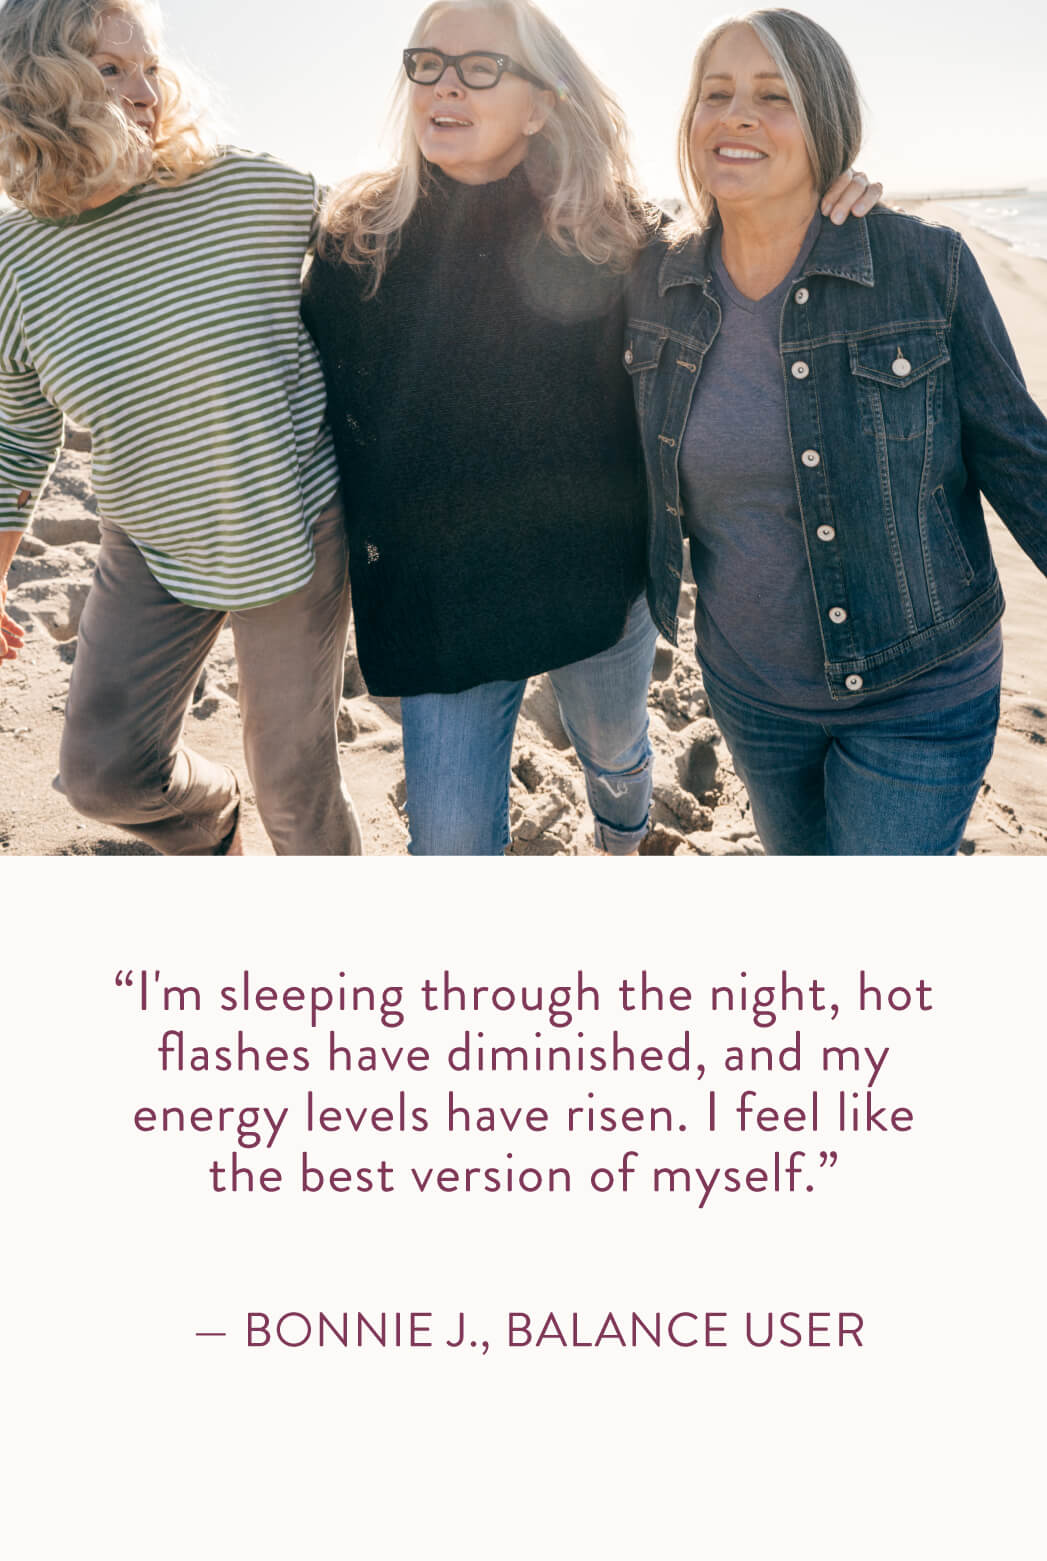 I'm sleeping through the night, hot flashes have diminished, and my energy levels have risen. I feel like the best version of myself." Bonnie J., Balance User